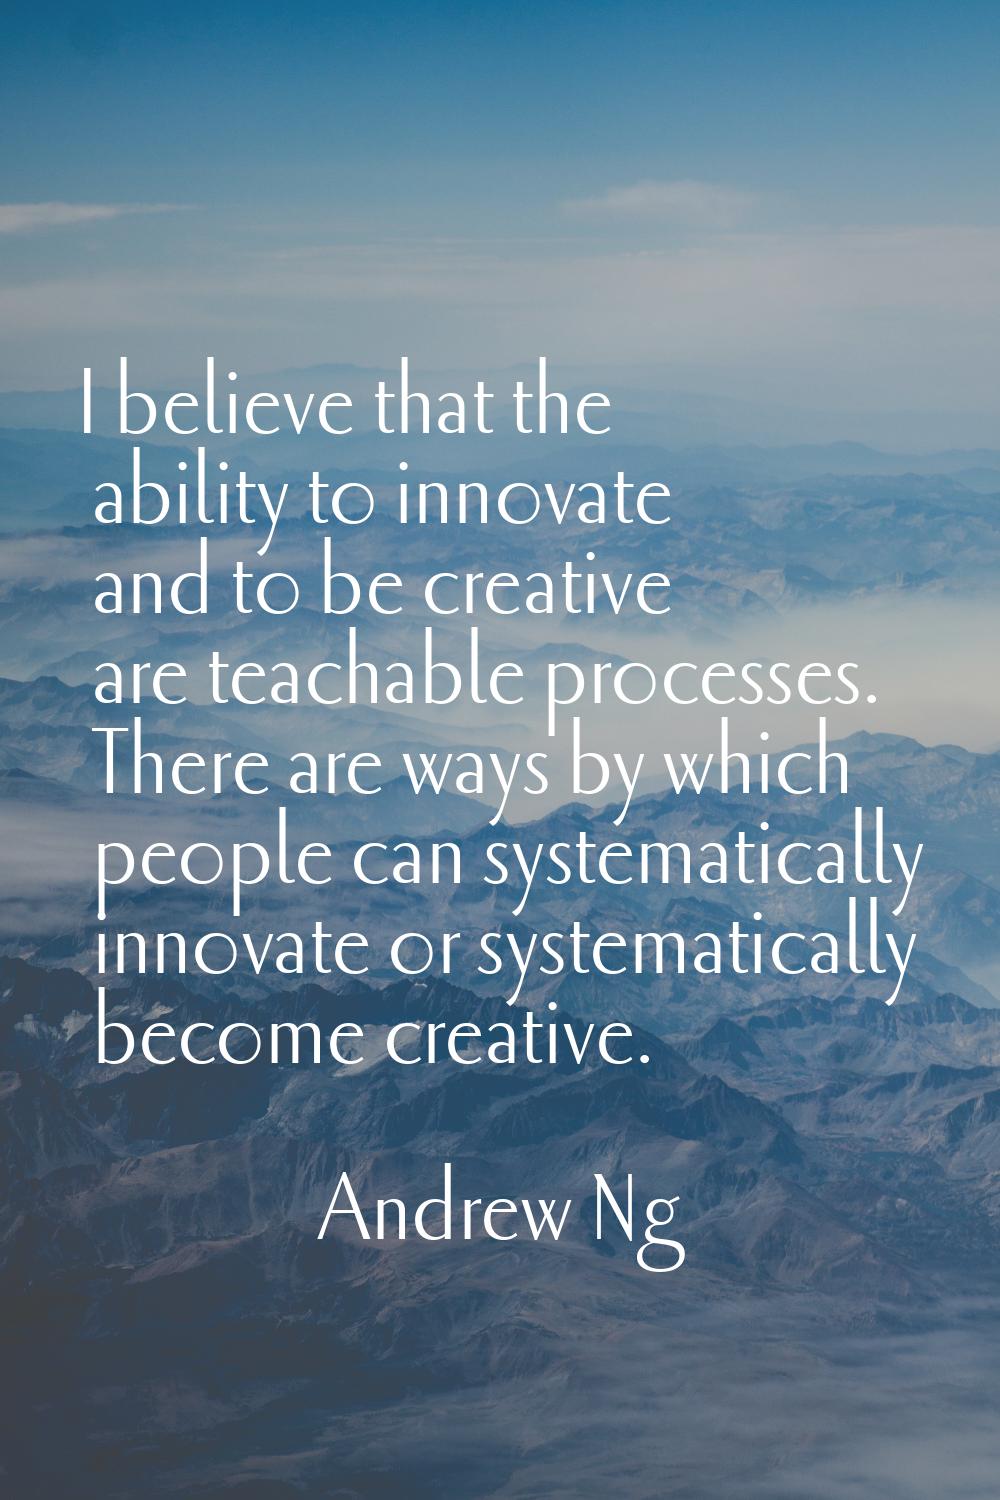 I believe that the ability to innovate and to be creative are teachable processes. There are ways b